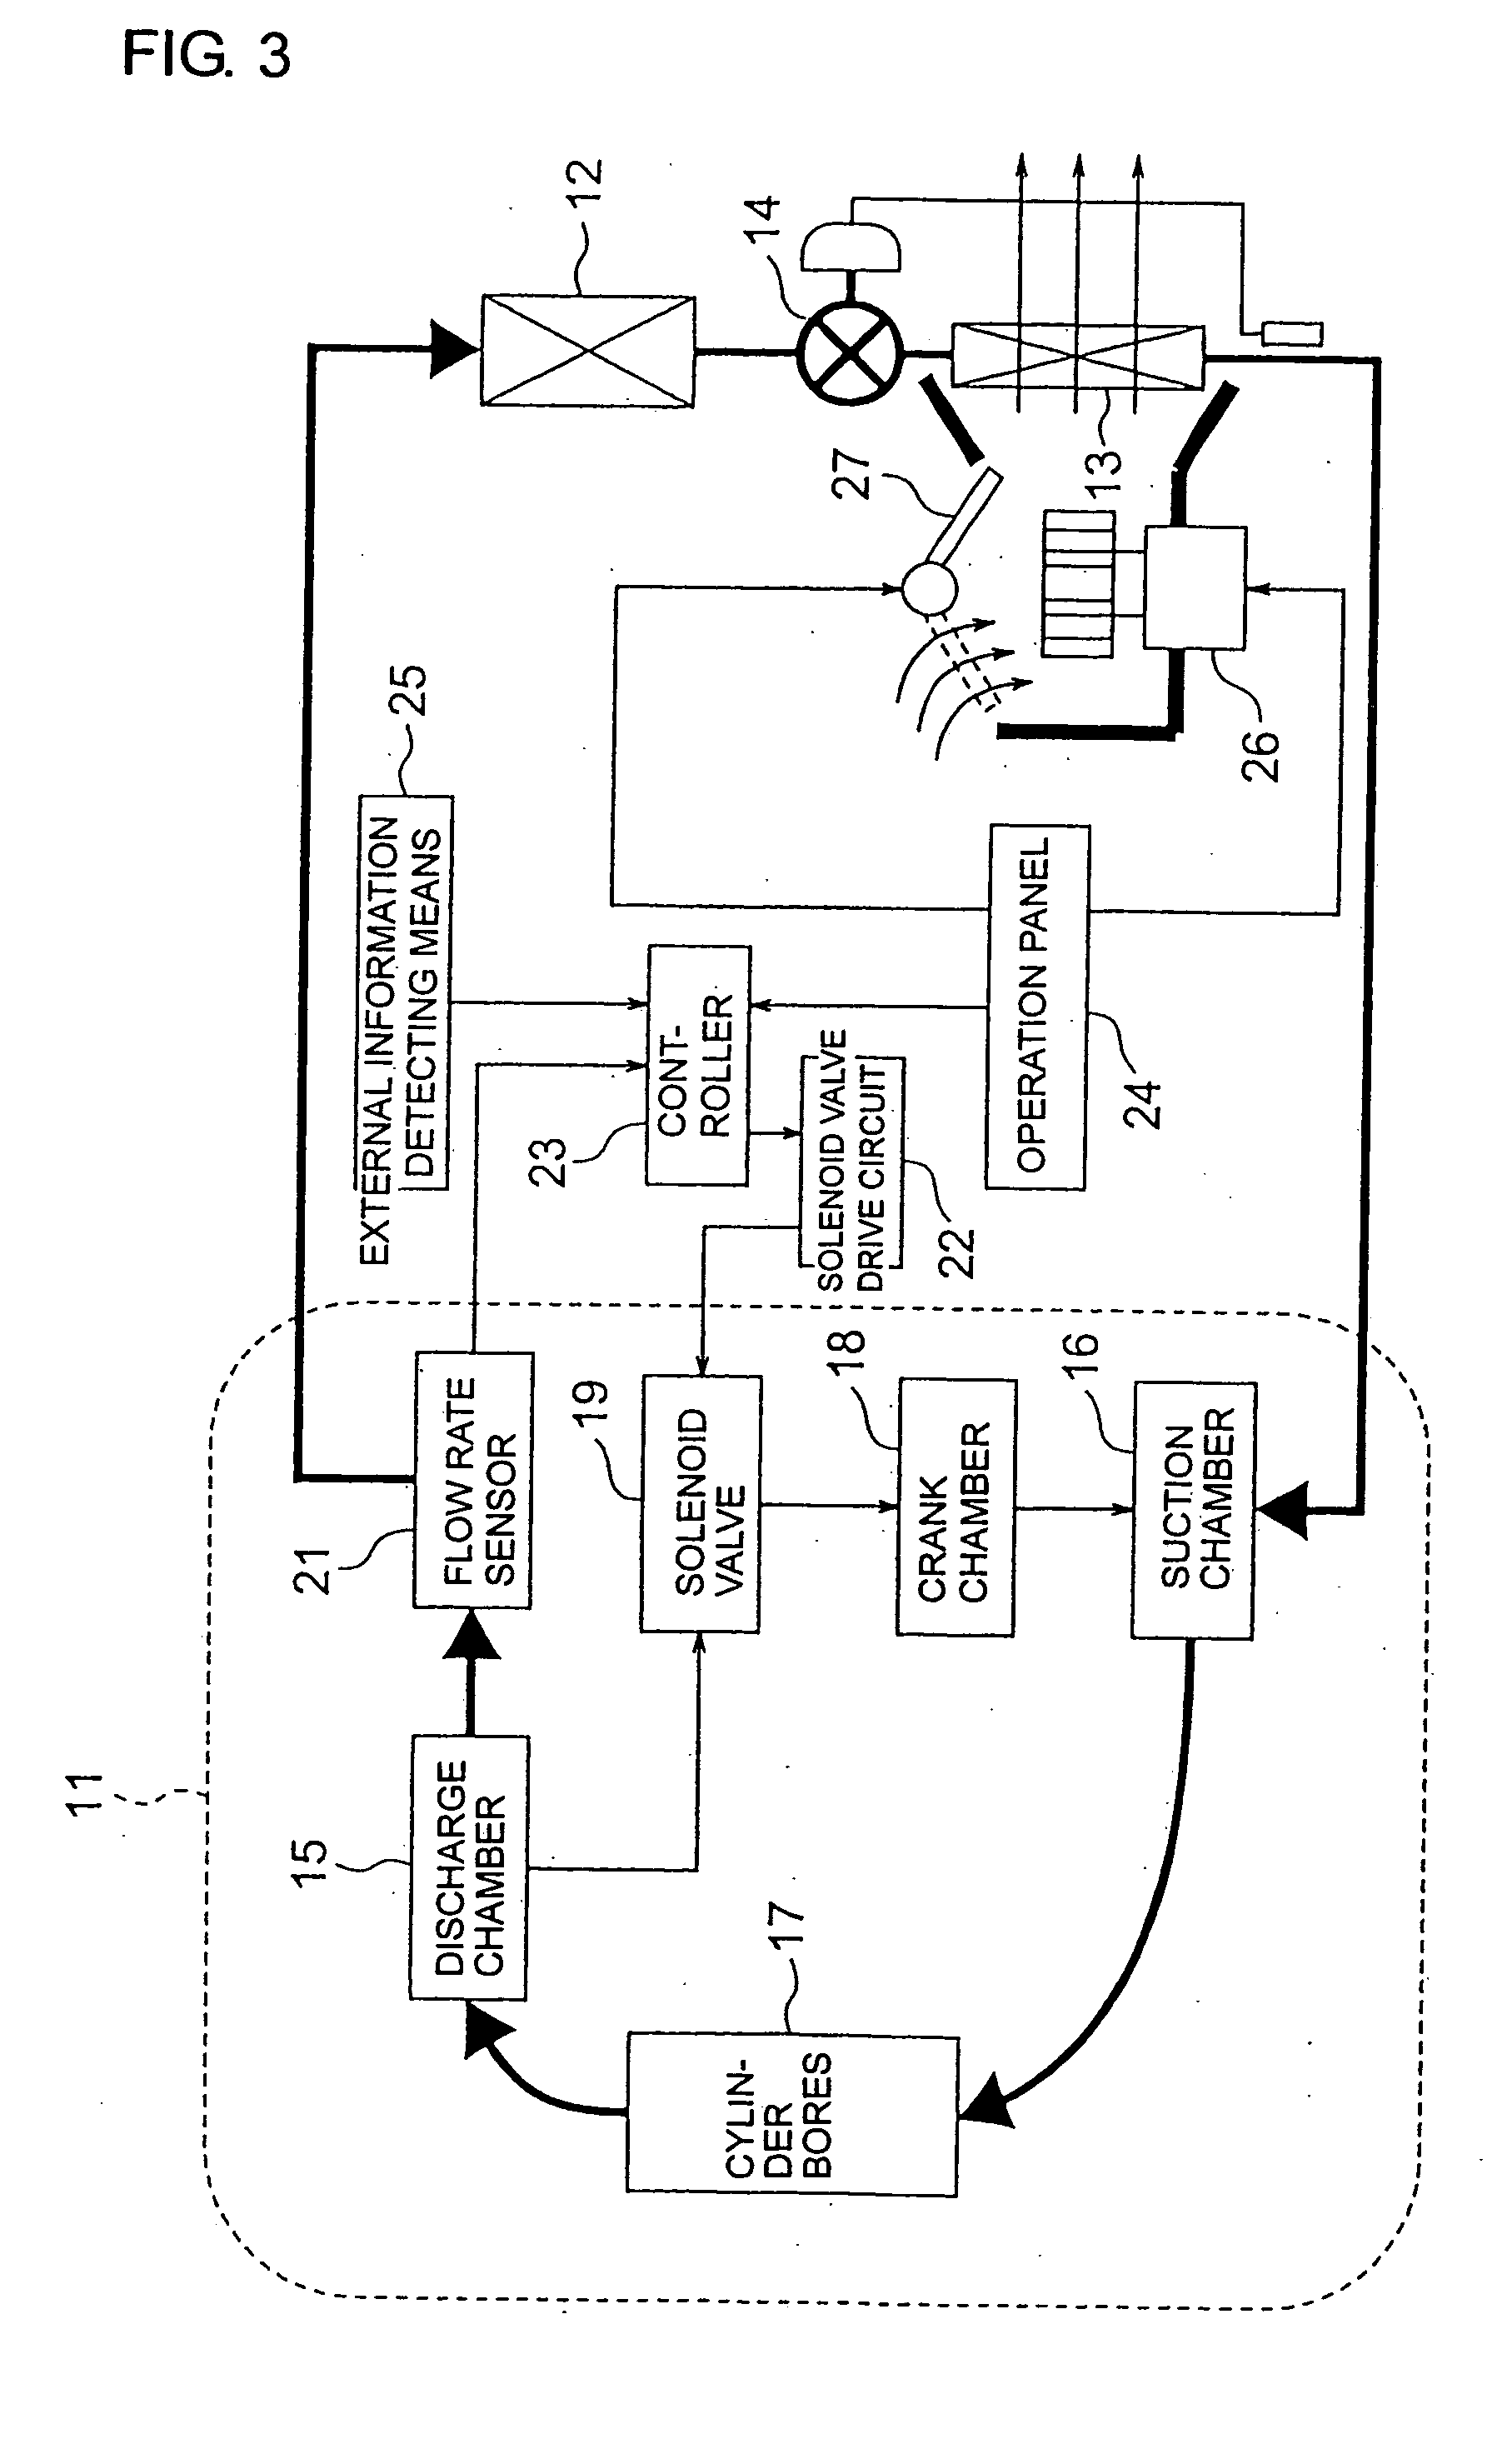 Air conditioning apparatus using variable displacement compressor